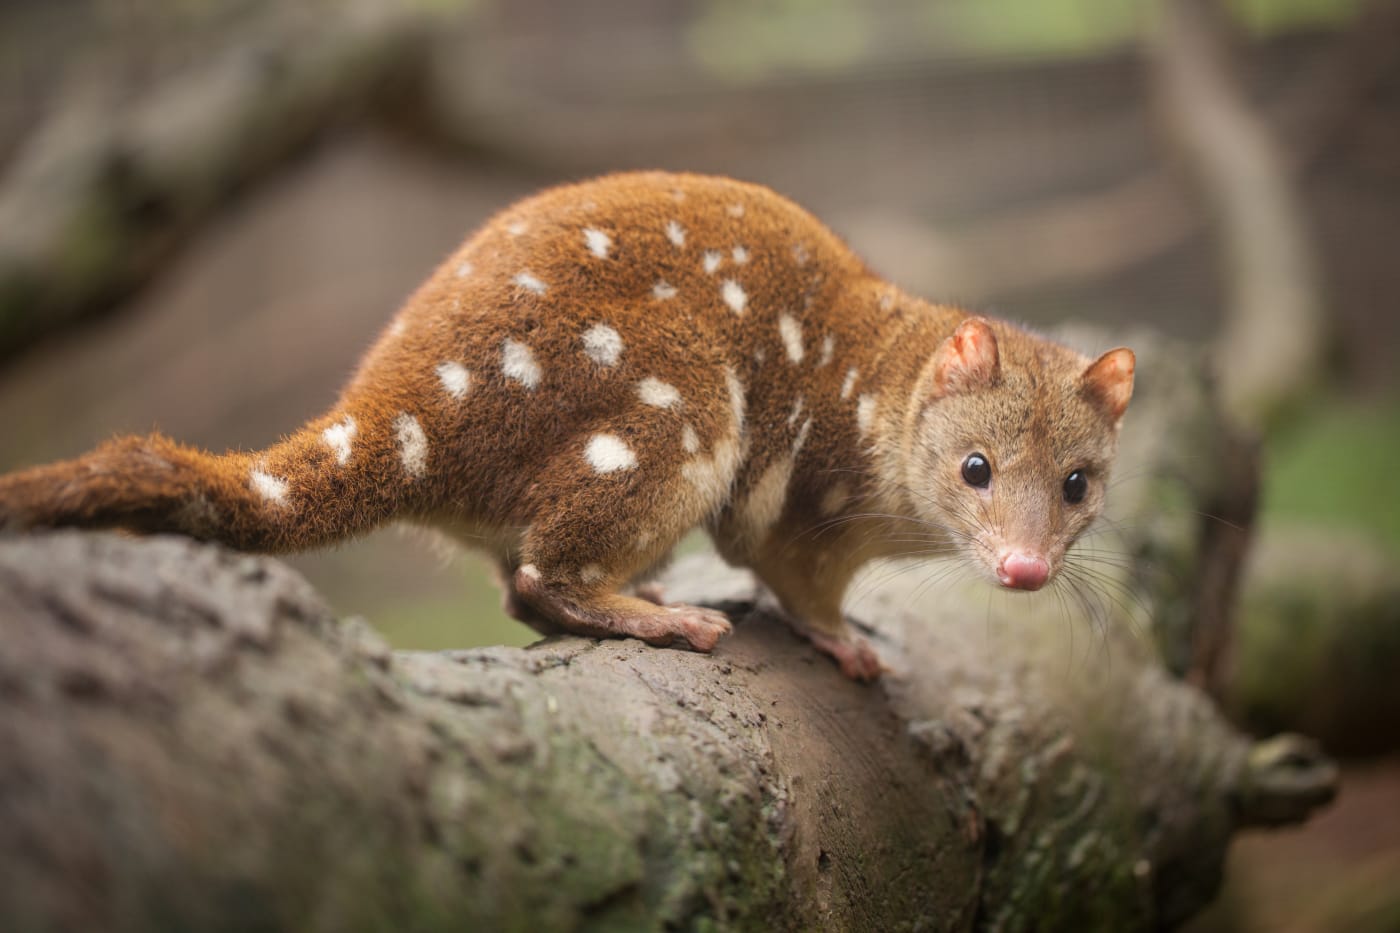 Spotted-tailed quoll also known as a tiger quoll on a log